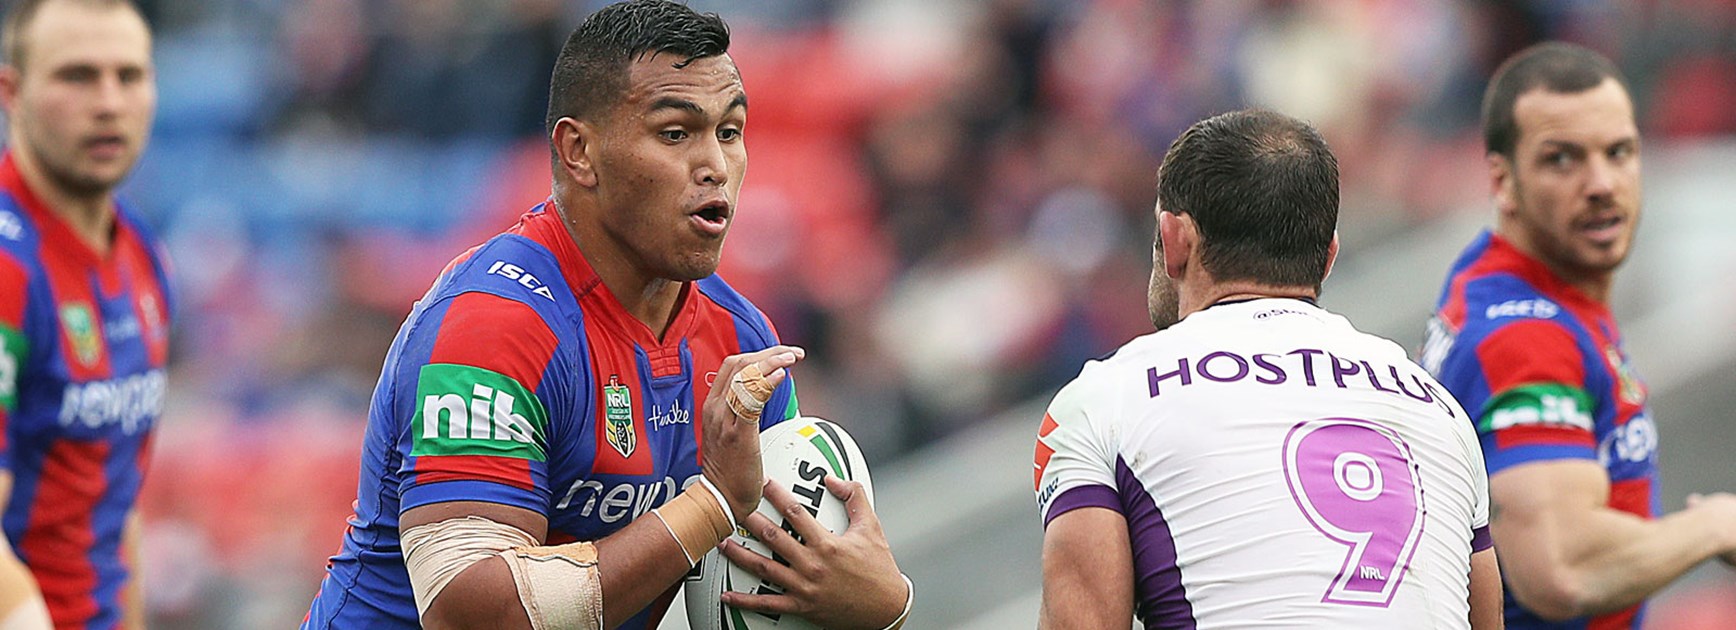 Knights prop Daniel Saifiti was cited for a shoulder charge in Round 19.